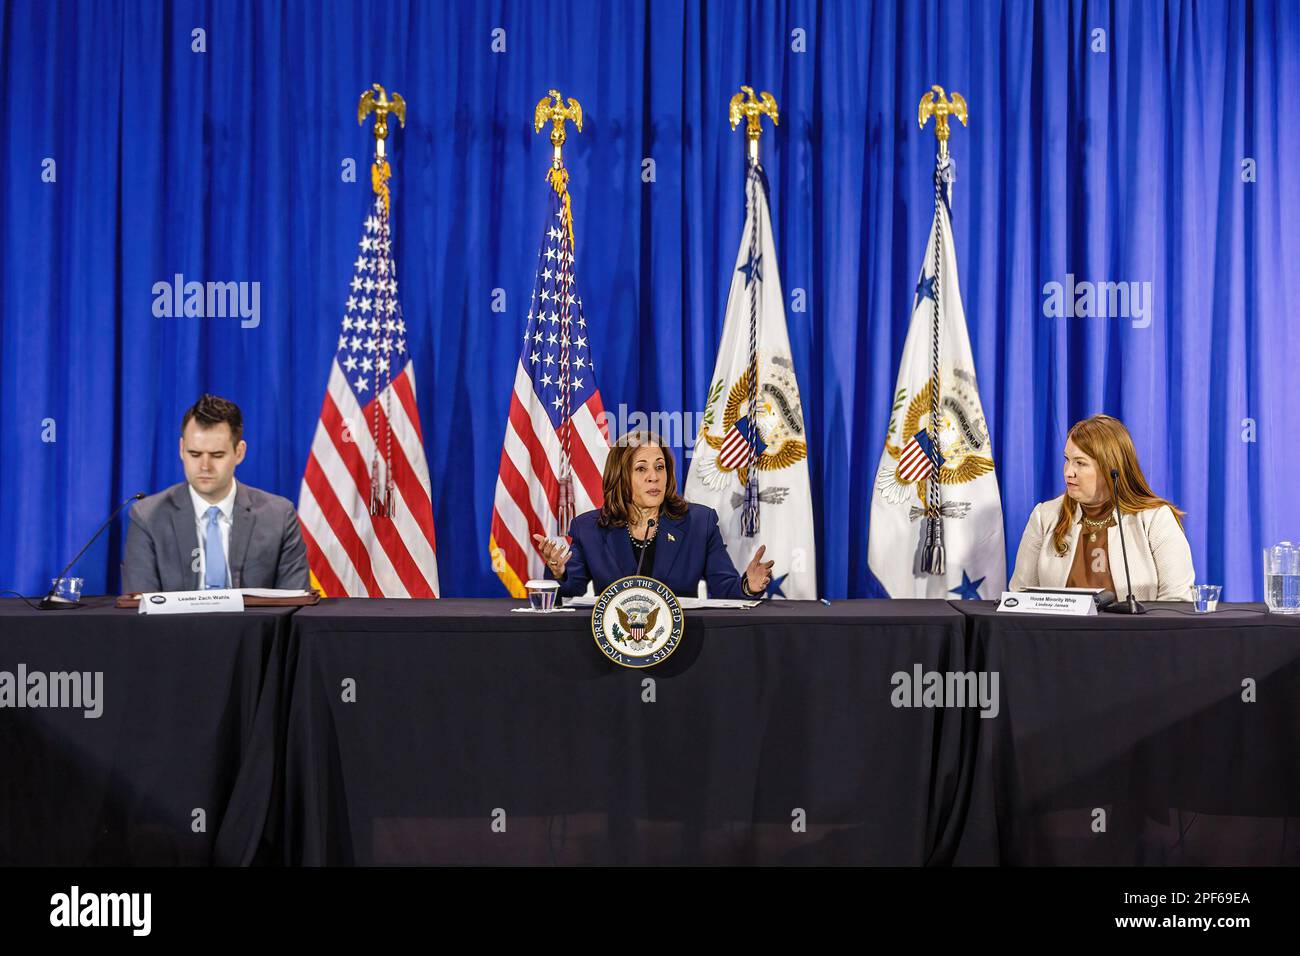 Des Moines, United States. 16th Mar, 2023. State Senator Zach Wahls (D-Coralville, left) and State Representative Lindsay James (D-Dubuque, right) listen as Vice President Kamala Harris (center) speaking. Vice President Kamala Harris held a press conference prior to a roundtable discussion on reproductive rights. (Photo by Greg Hauenstein/SOPA Images/Sipa USA) Credit: Sipa USA/Alamy Live News Stock Photo